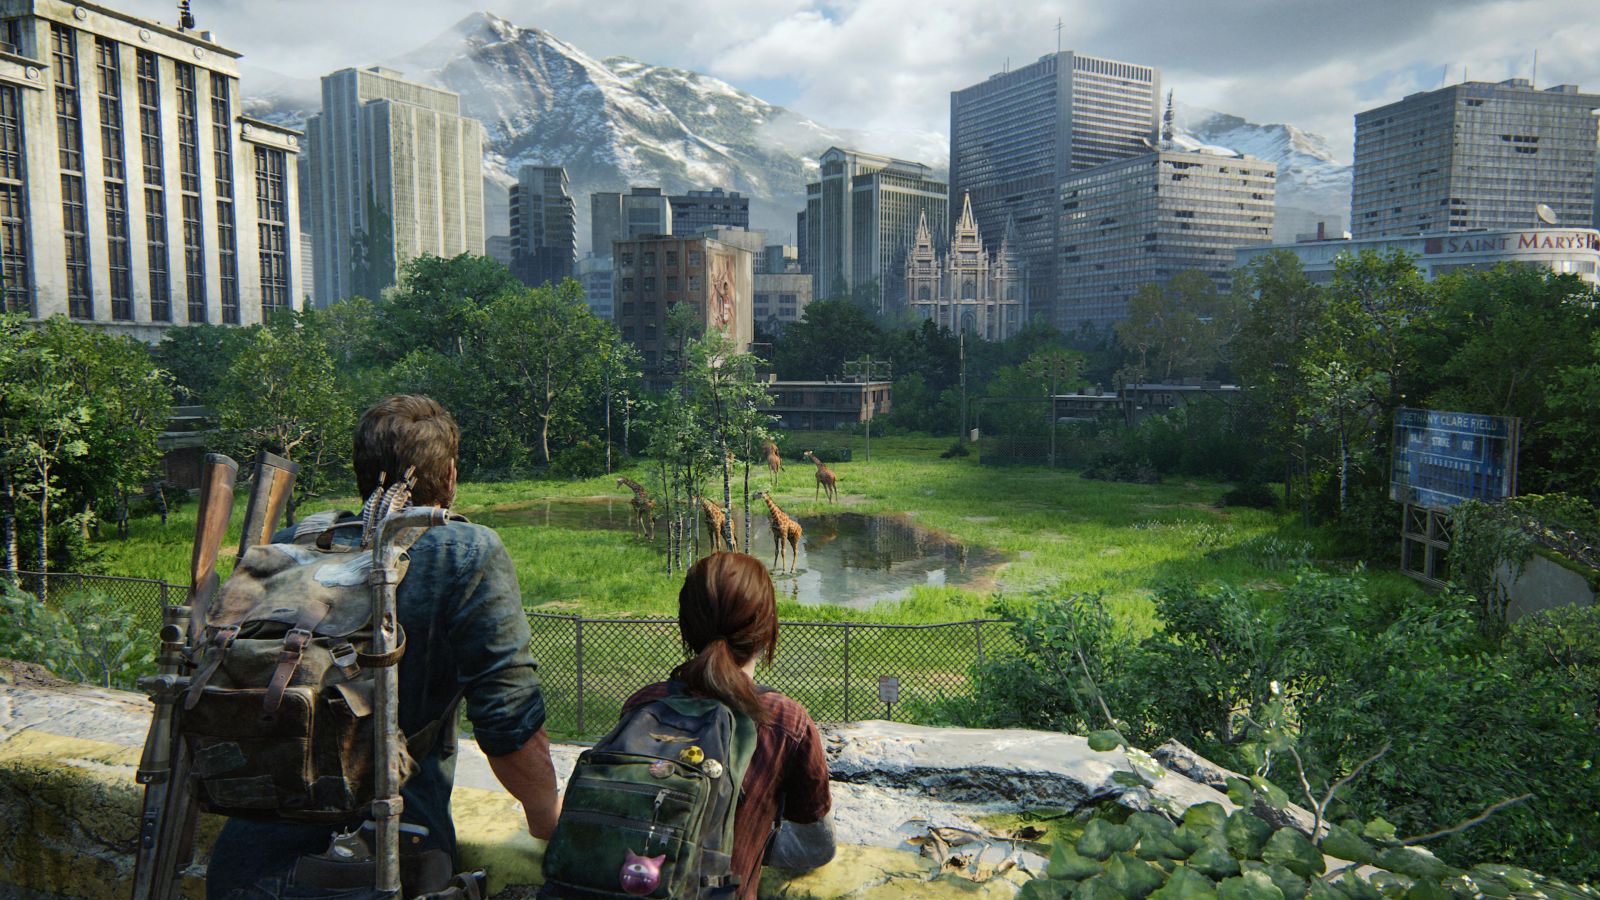 The Last Of Us PC: Just Play And Enjoy Your Adventure!